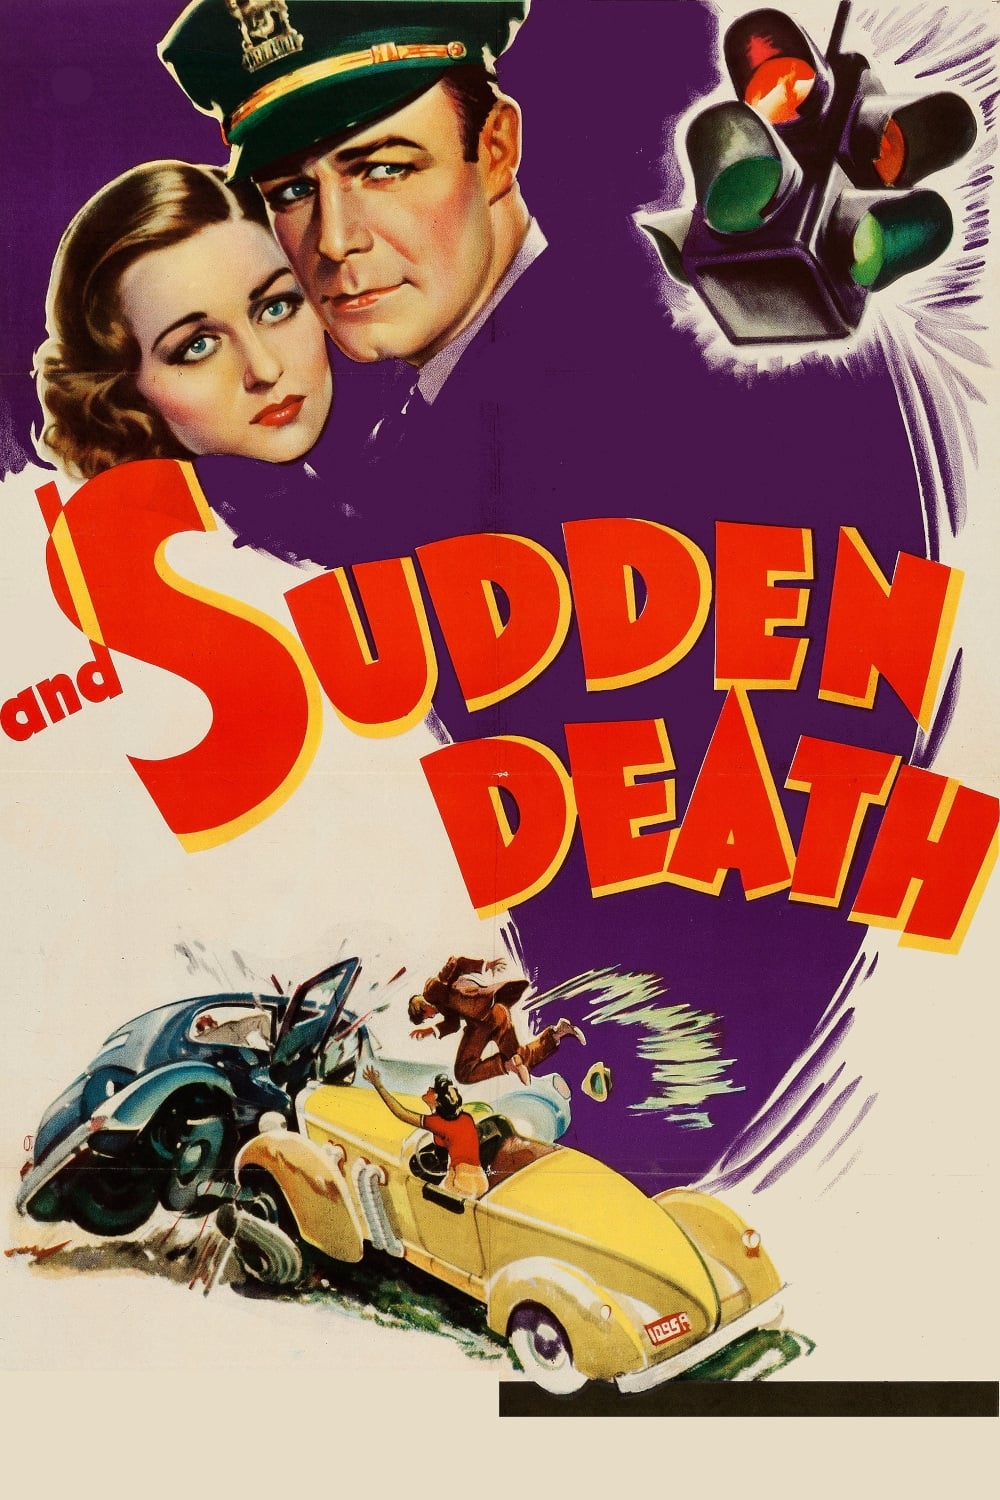 And Sudden Death (1936)